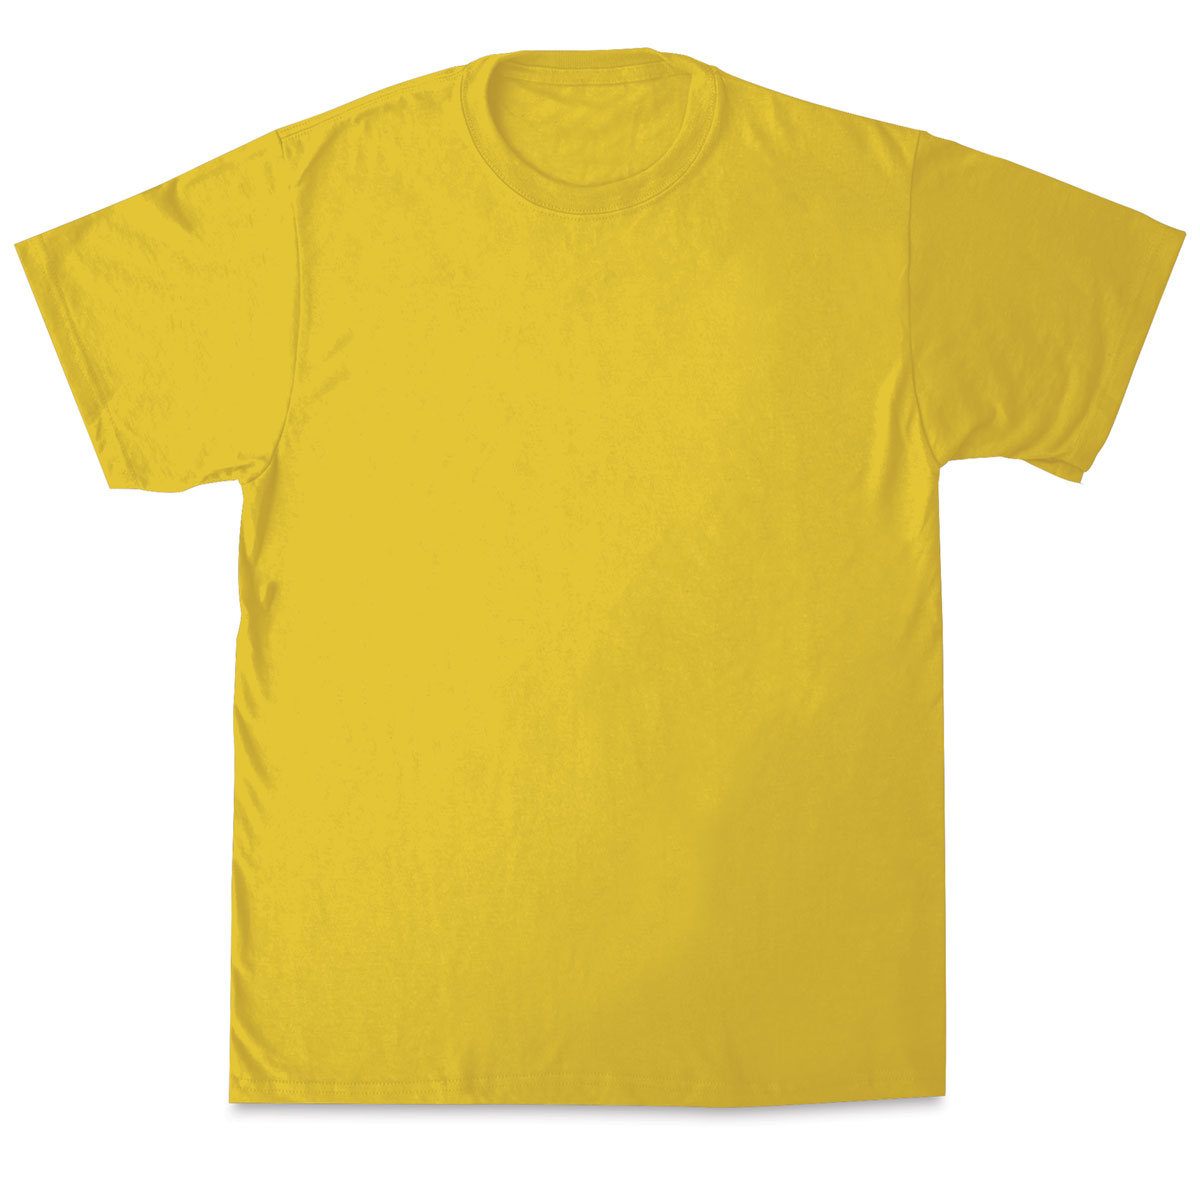 First Quality 50/50 T-Shirts, Adult Sizes - Yellow Small | BLICK Art ...